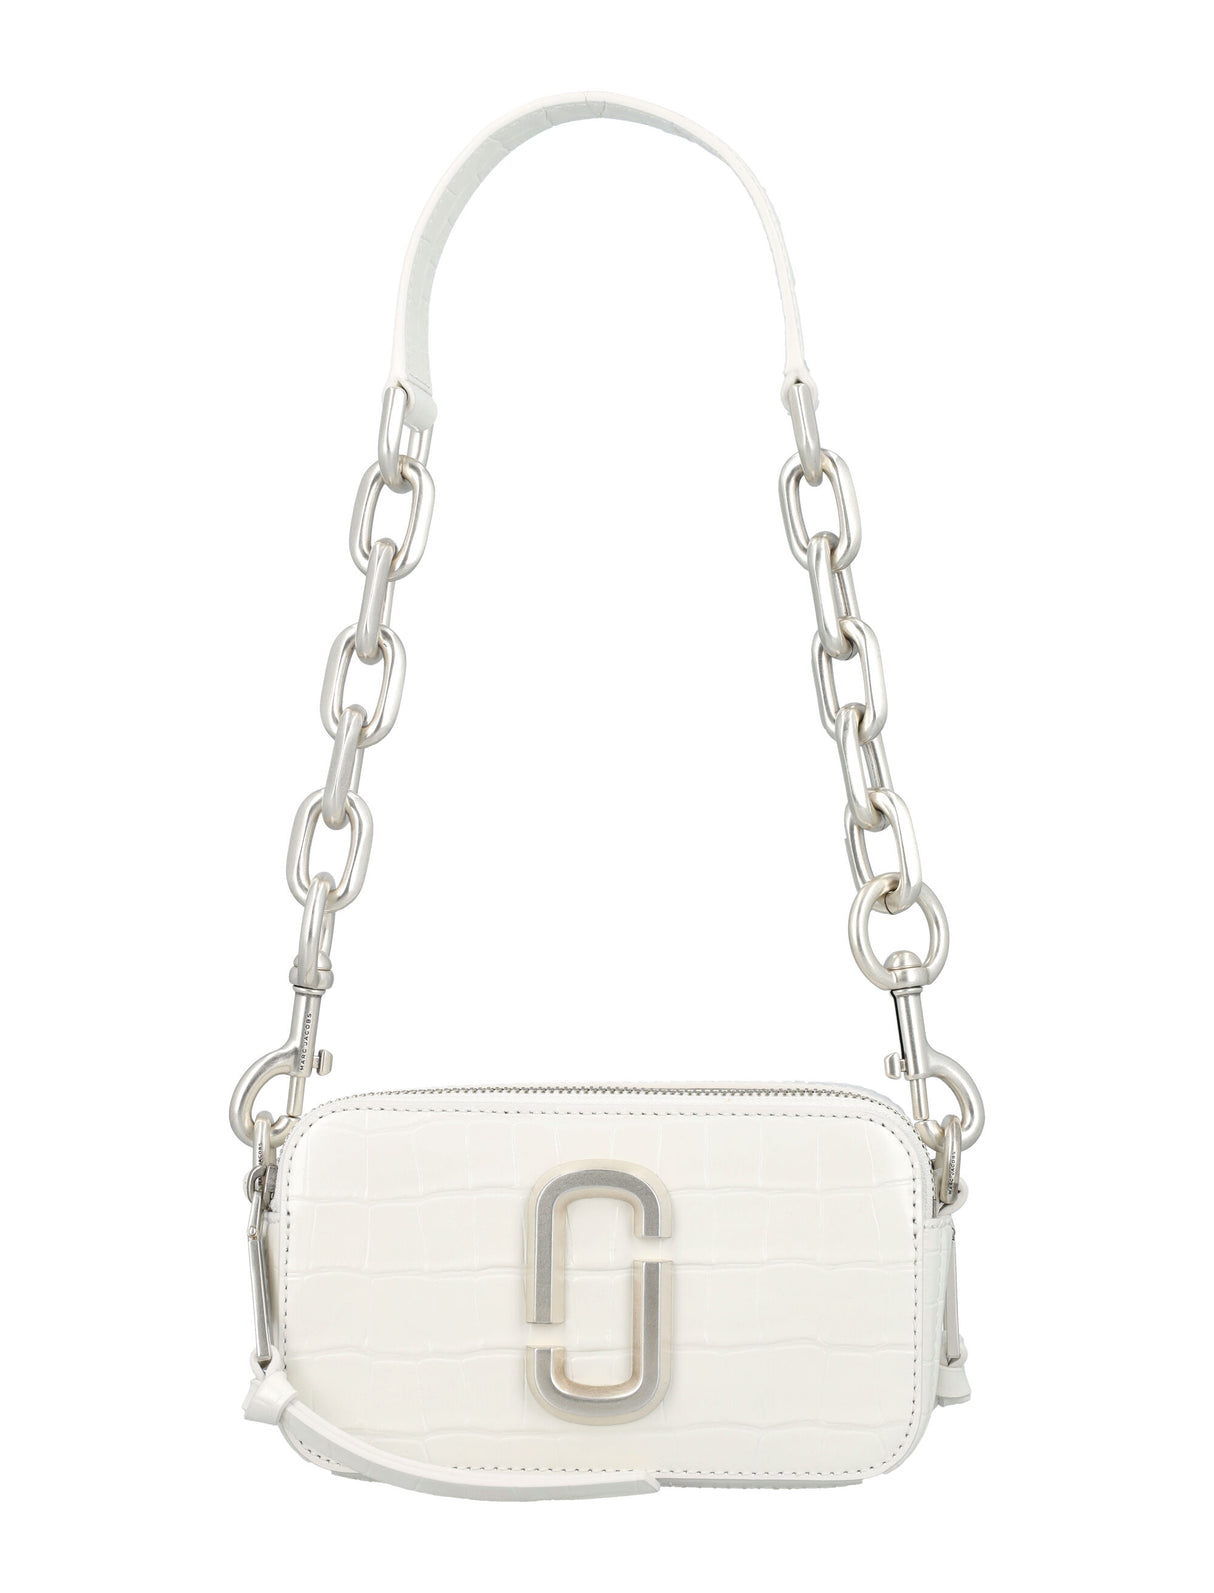 MARC JACOBS The Chic Croc-Embossed Snapshot Handbag for the Fashion-Forward Woman